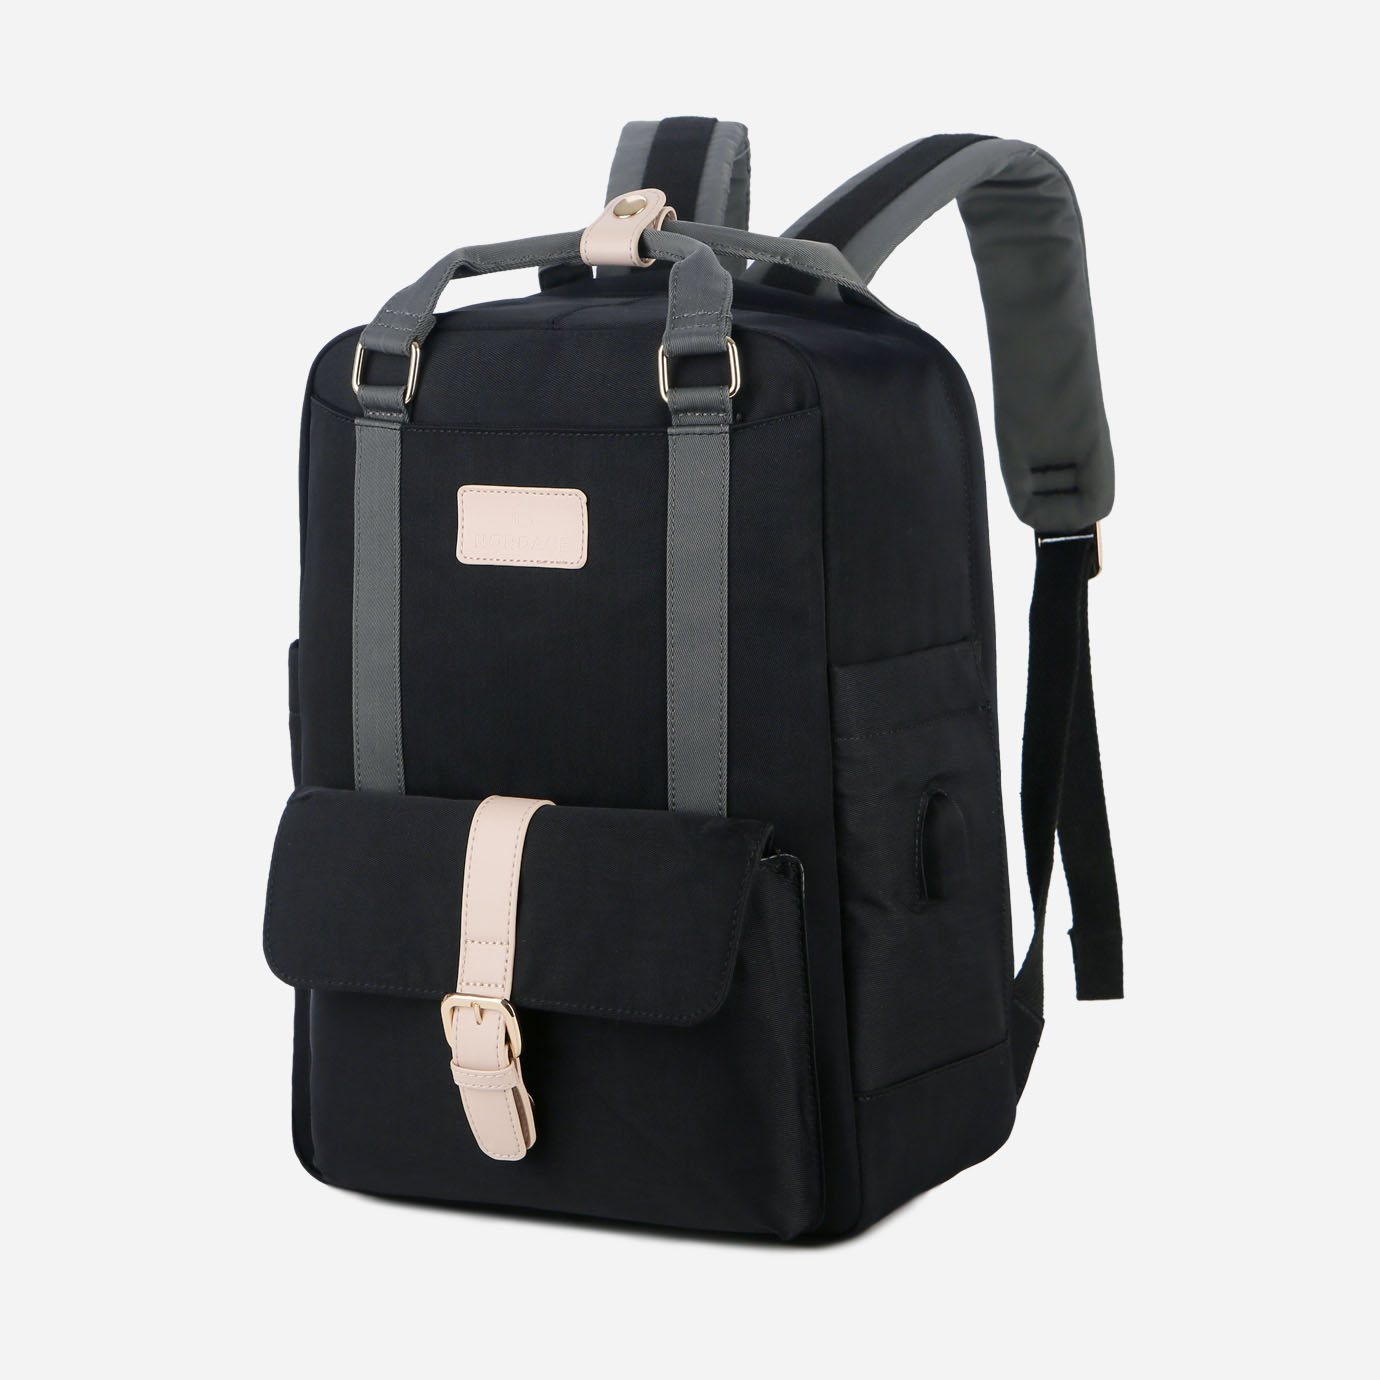 Nordace Eclat - Light & Durable Backpack